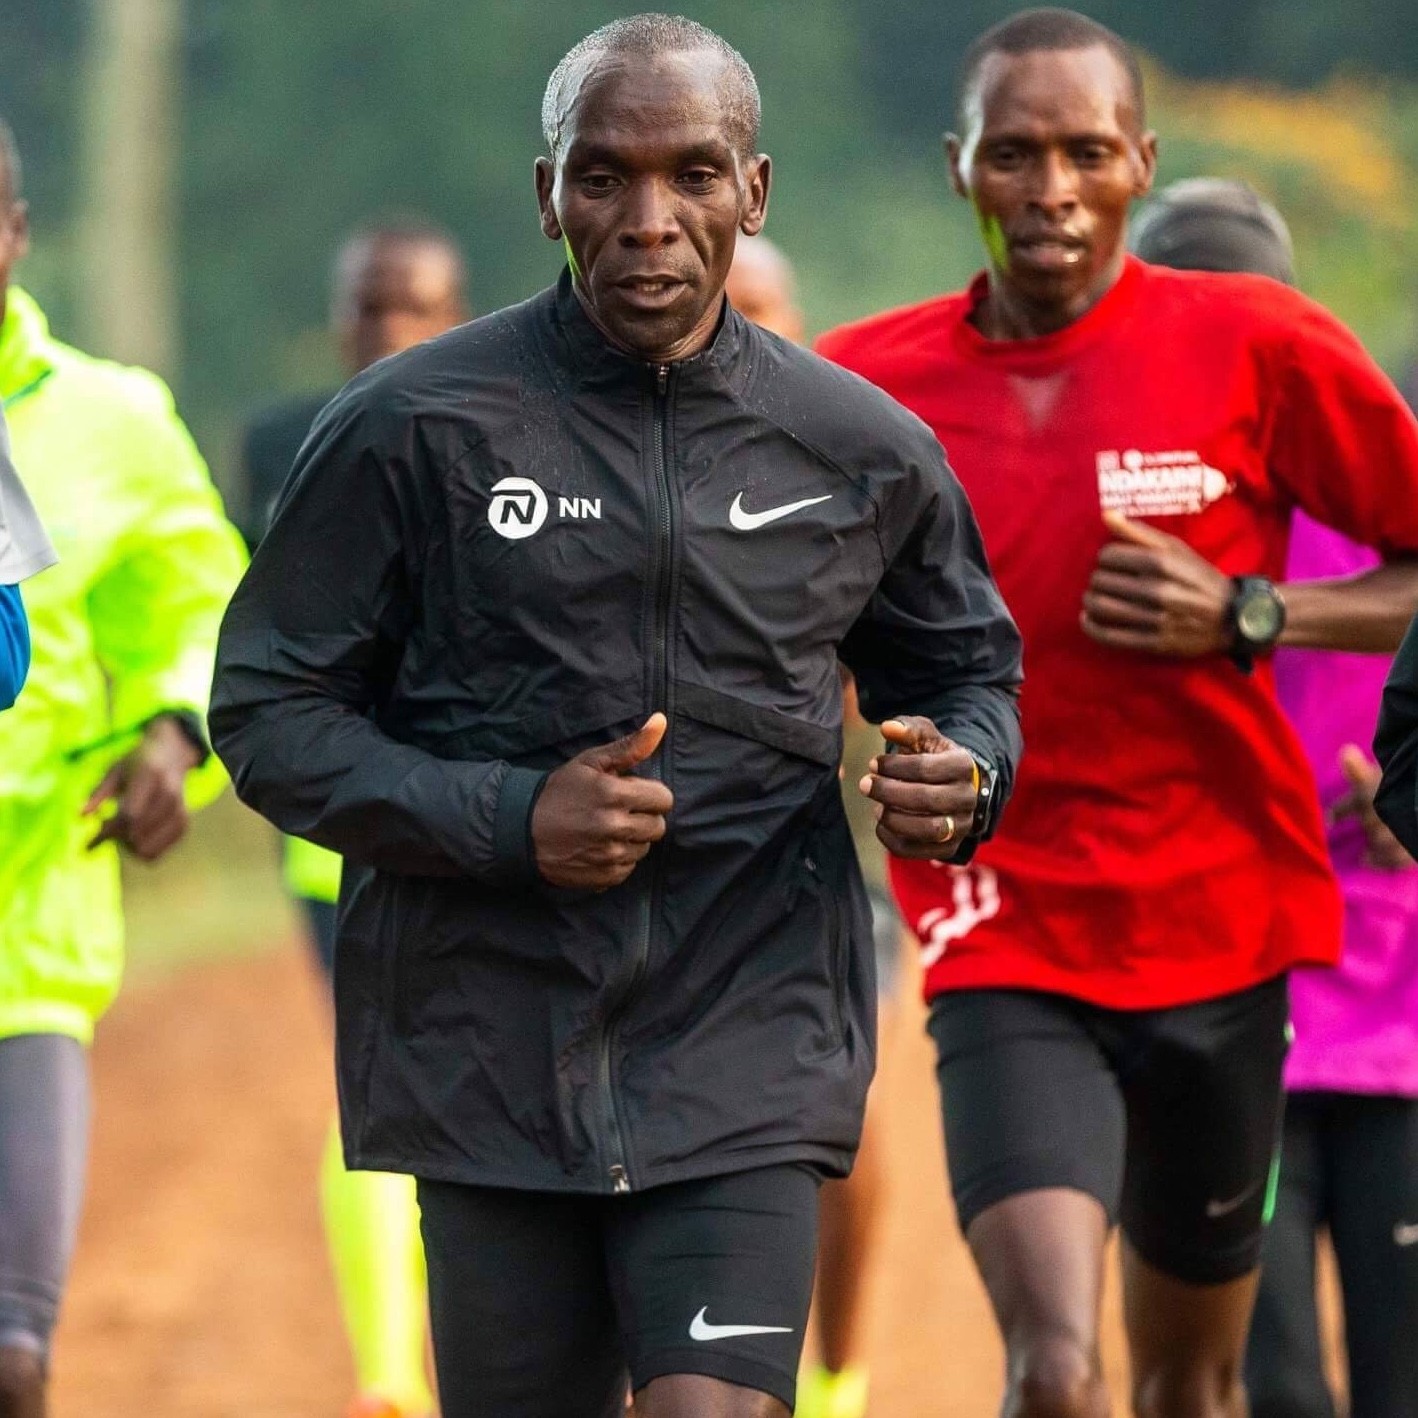 Eliud Kipchoge is a simple man who helps others - Part three of a three part series on the King of the Marathon